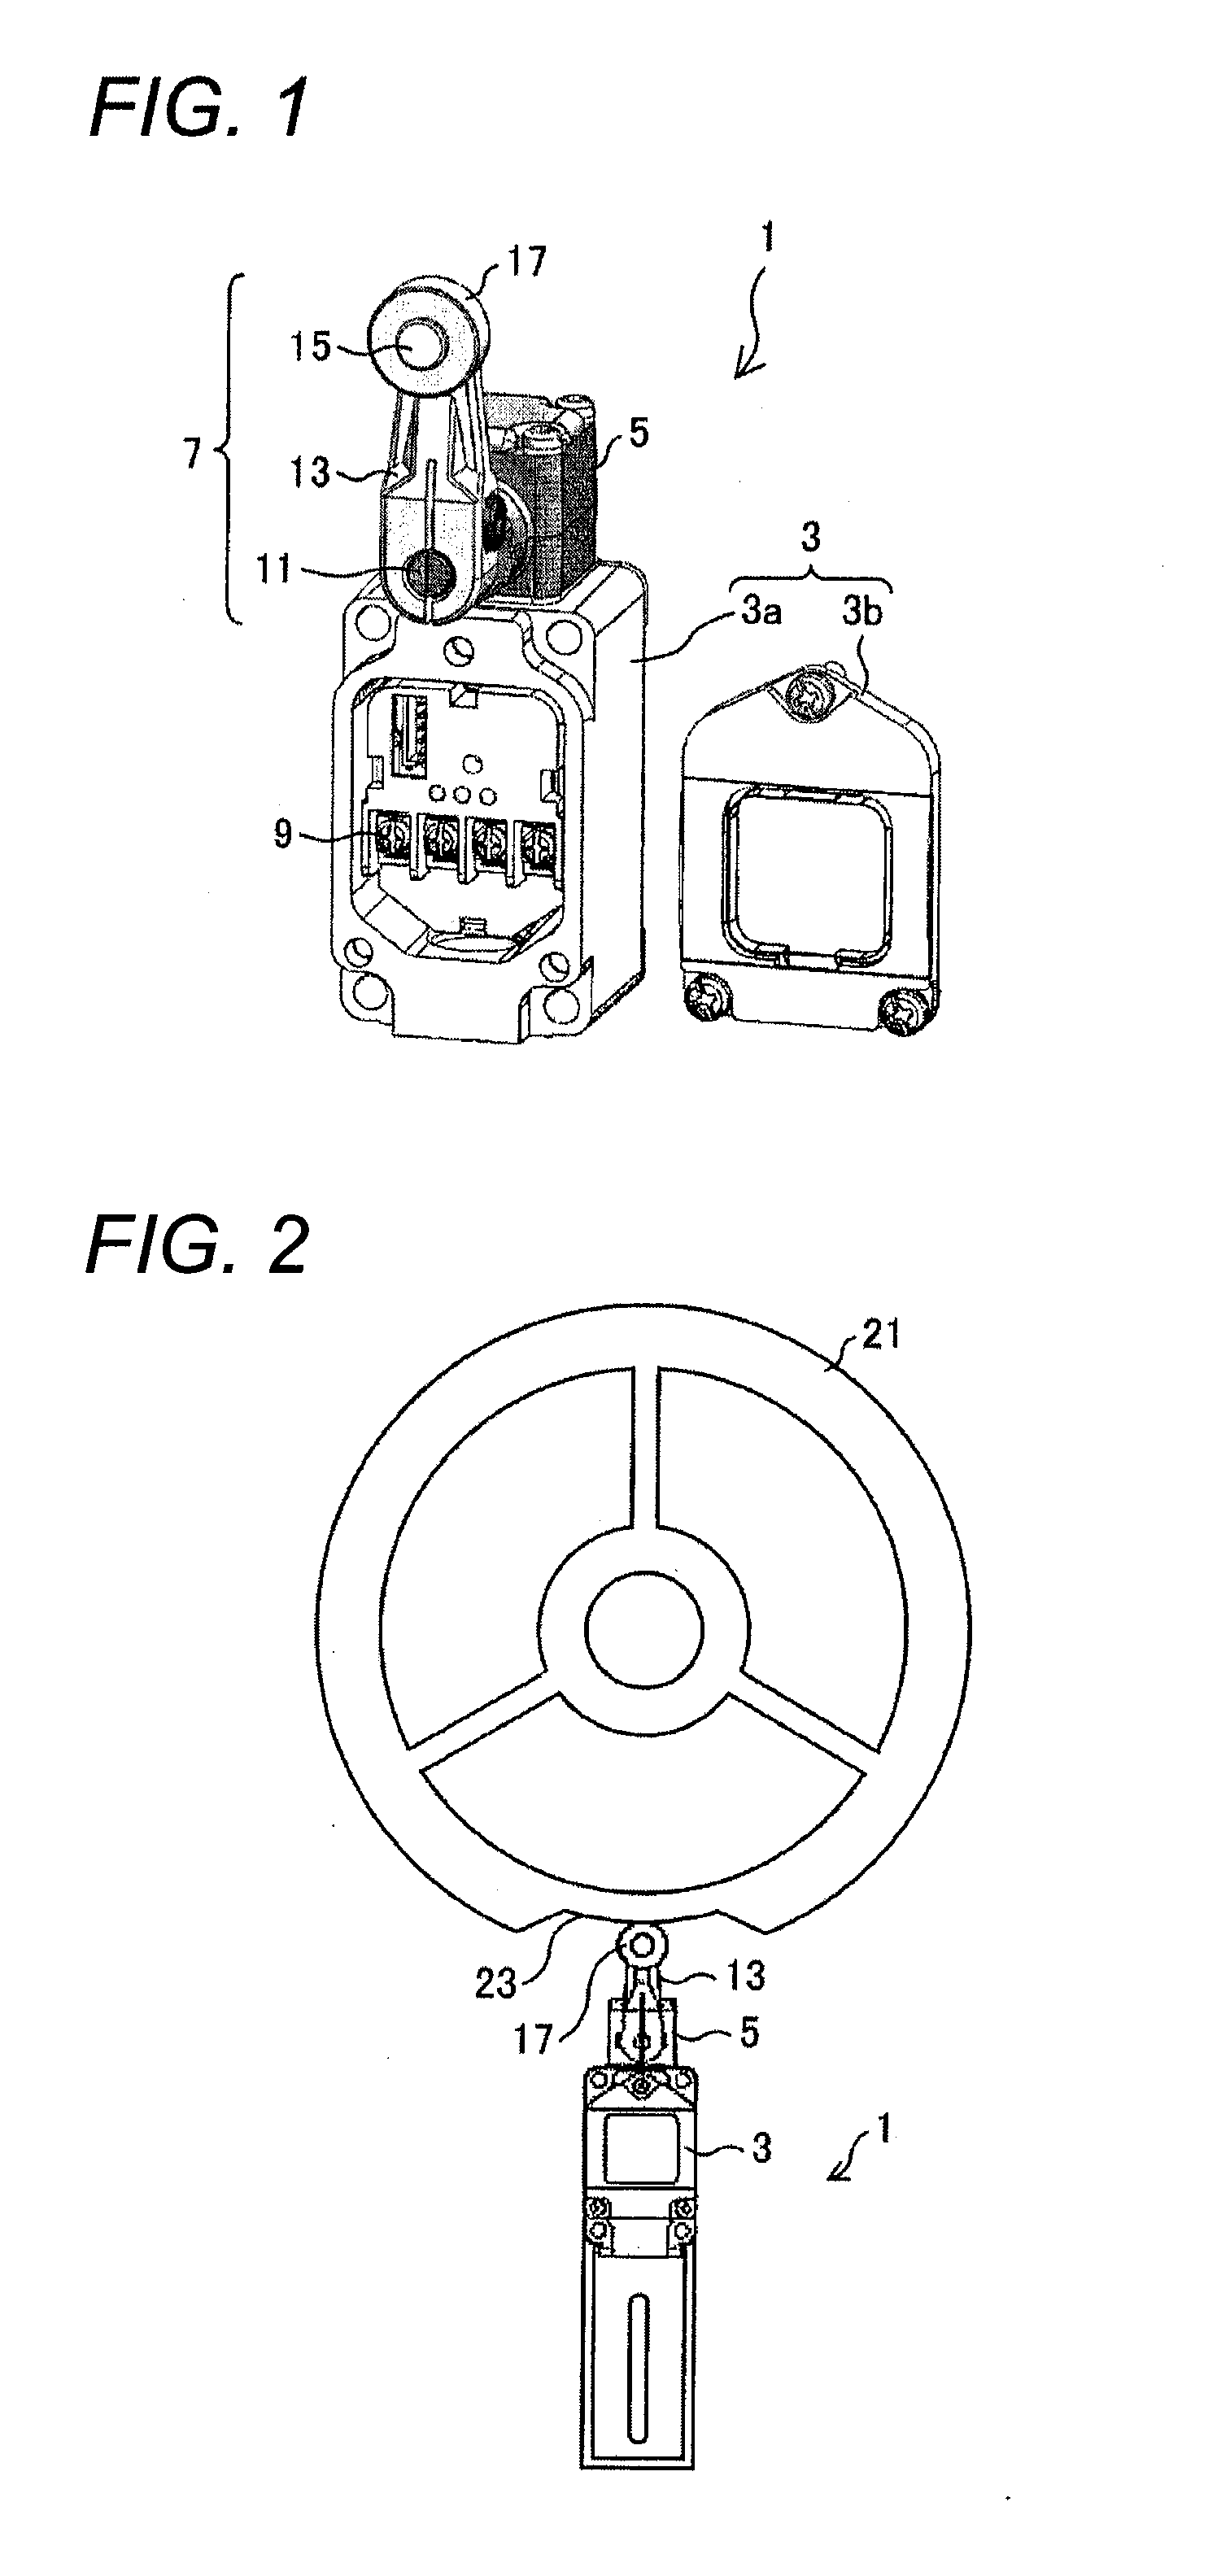 Object detecting actuator and object detecting switch